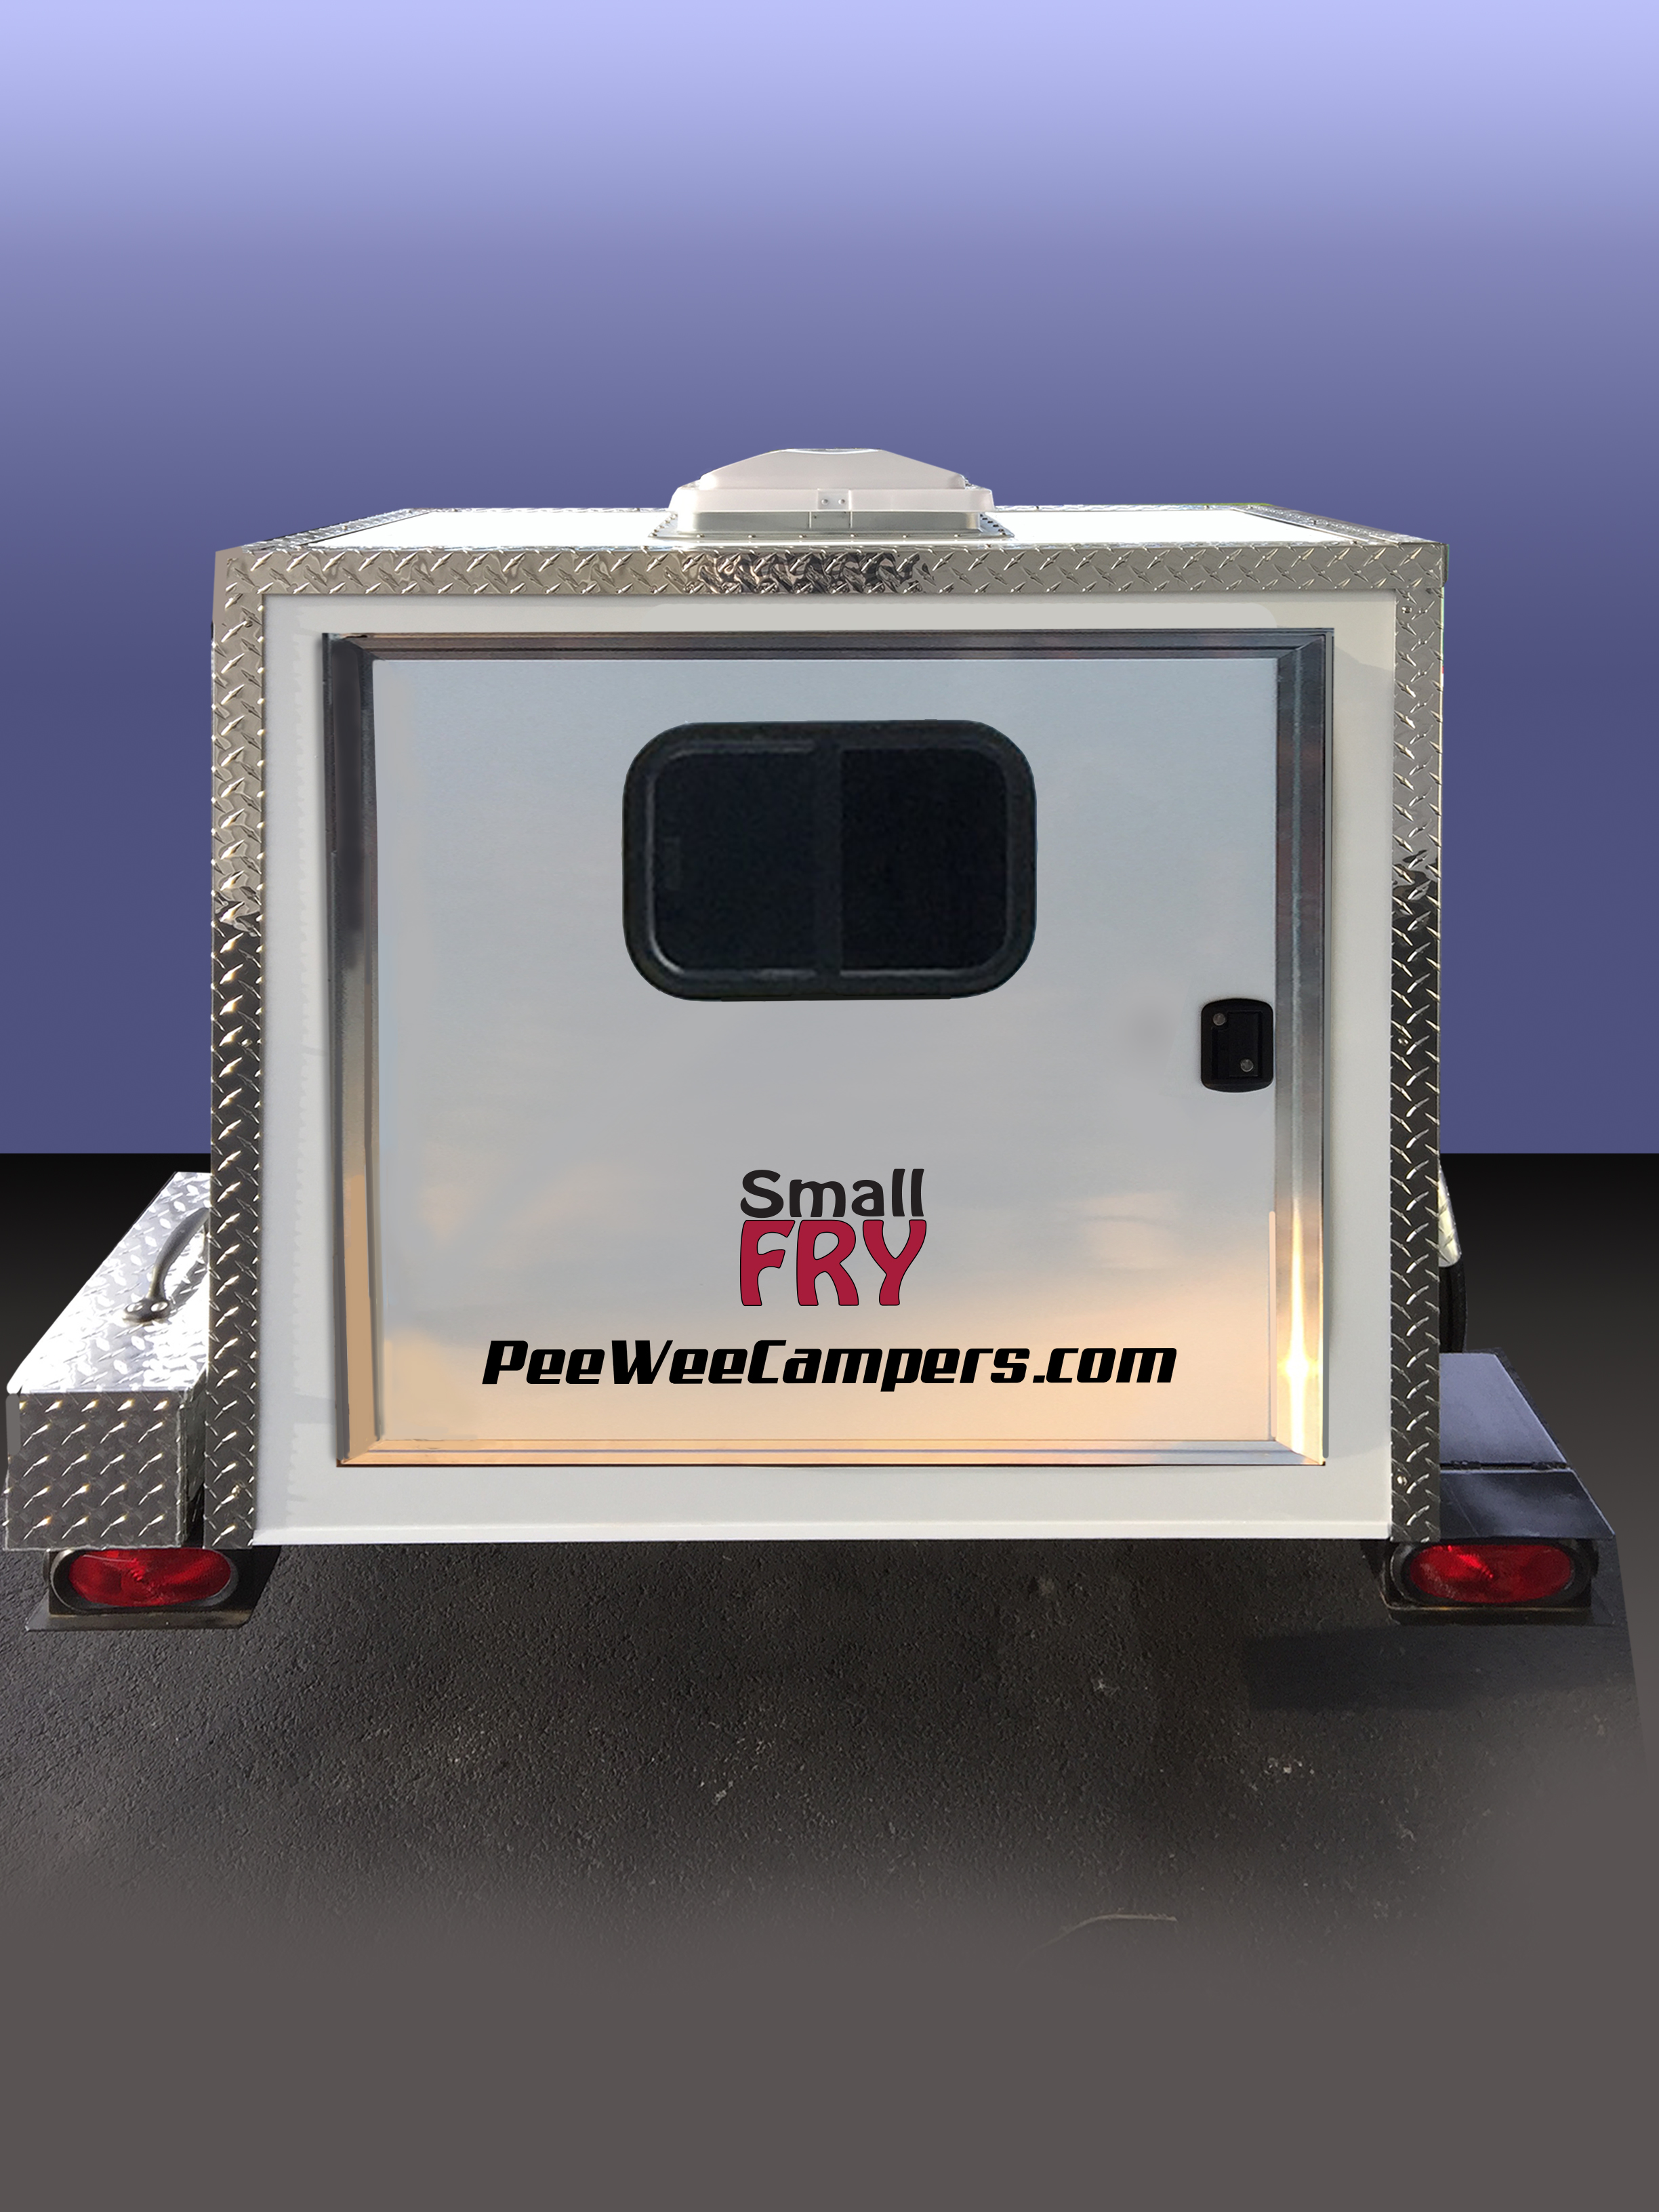 The Small-Fry Model